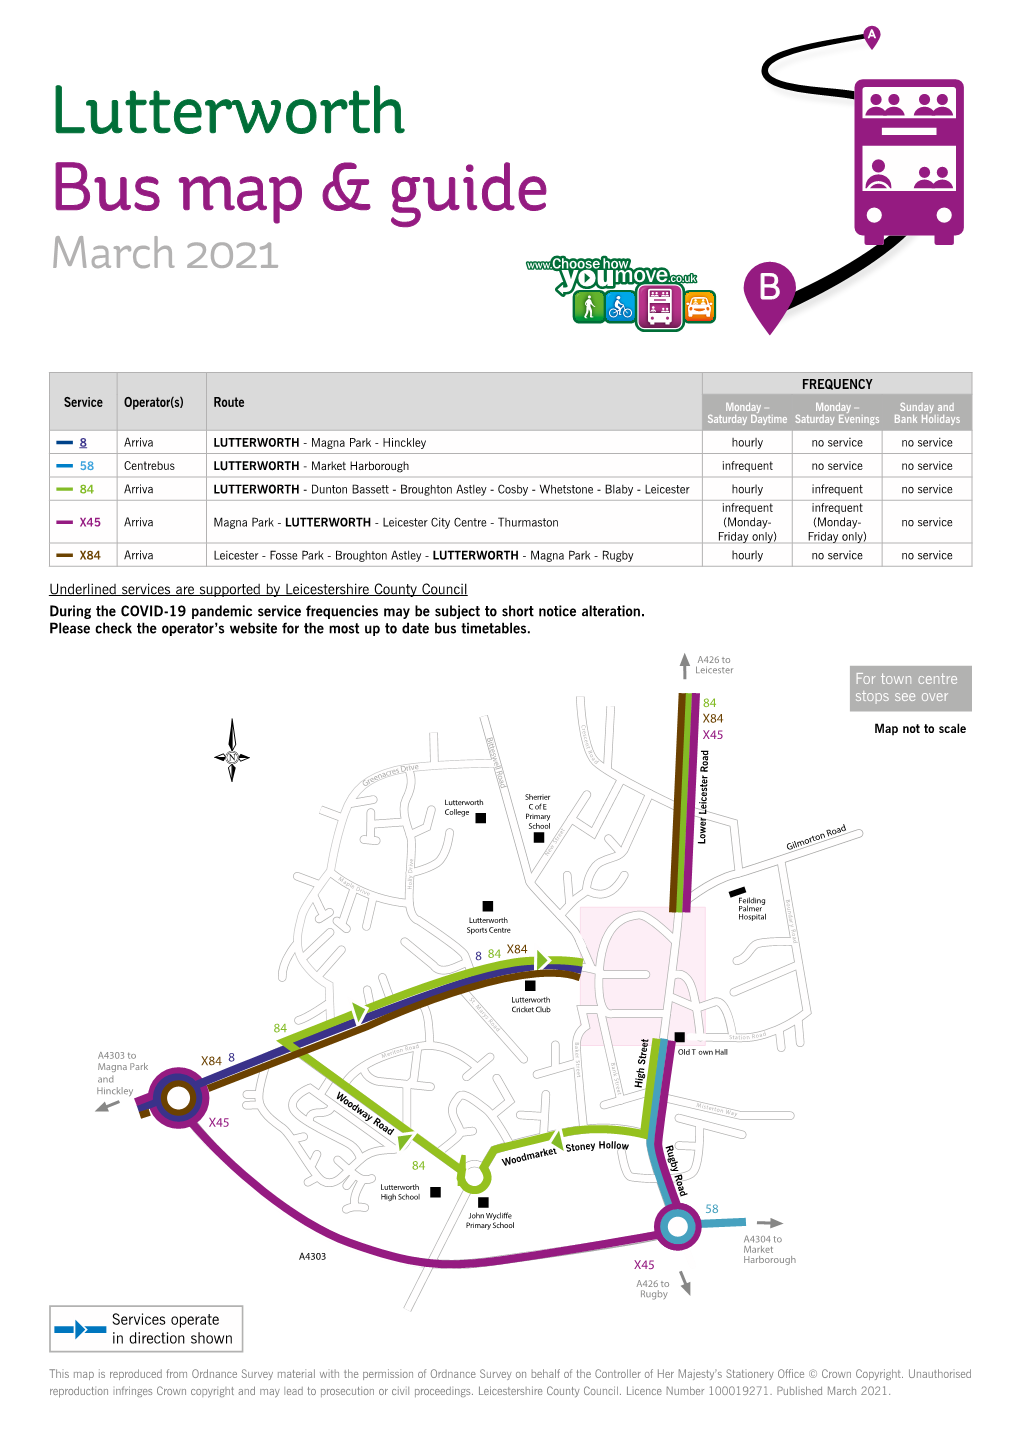 Lutterworth Bus Map and Guide